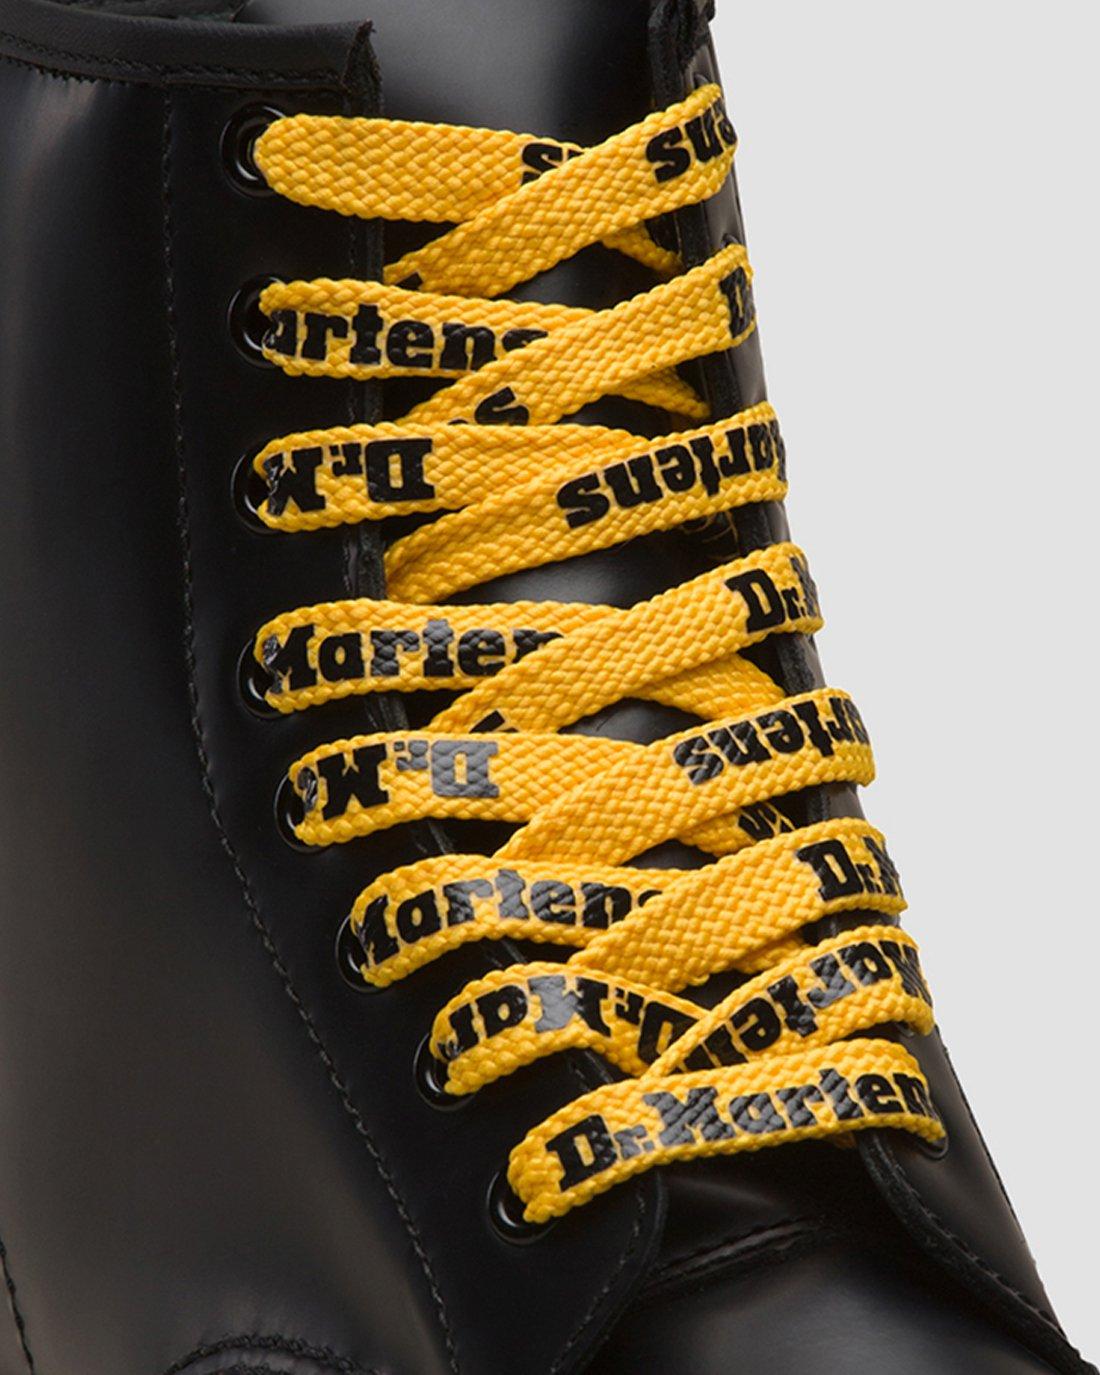 Flat Yellow Shoelaces ← Stunning laces that fit all shoes